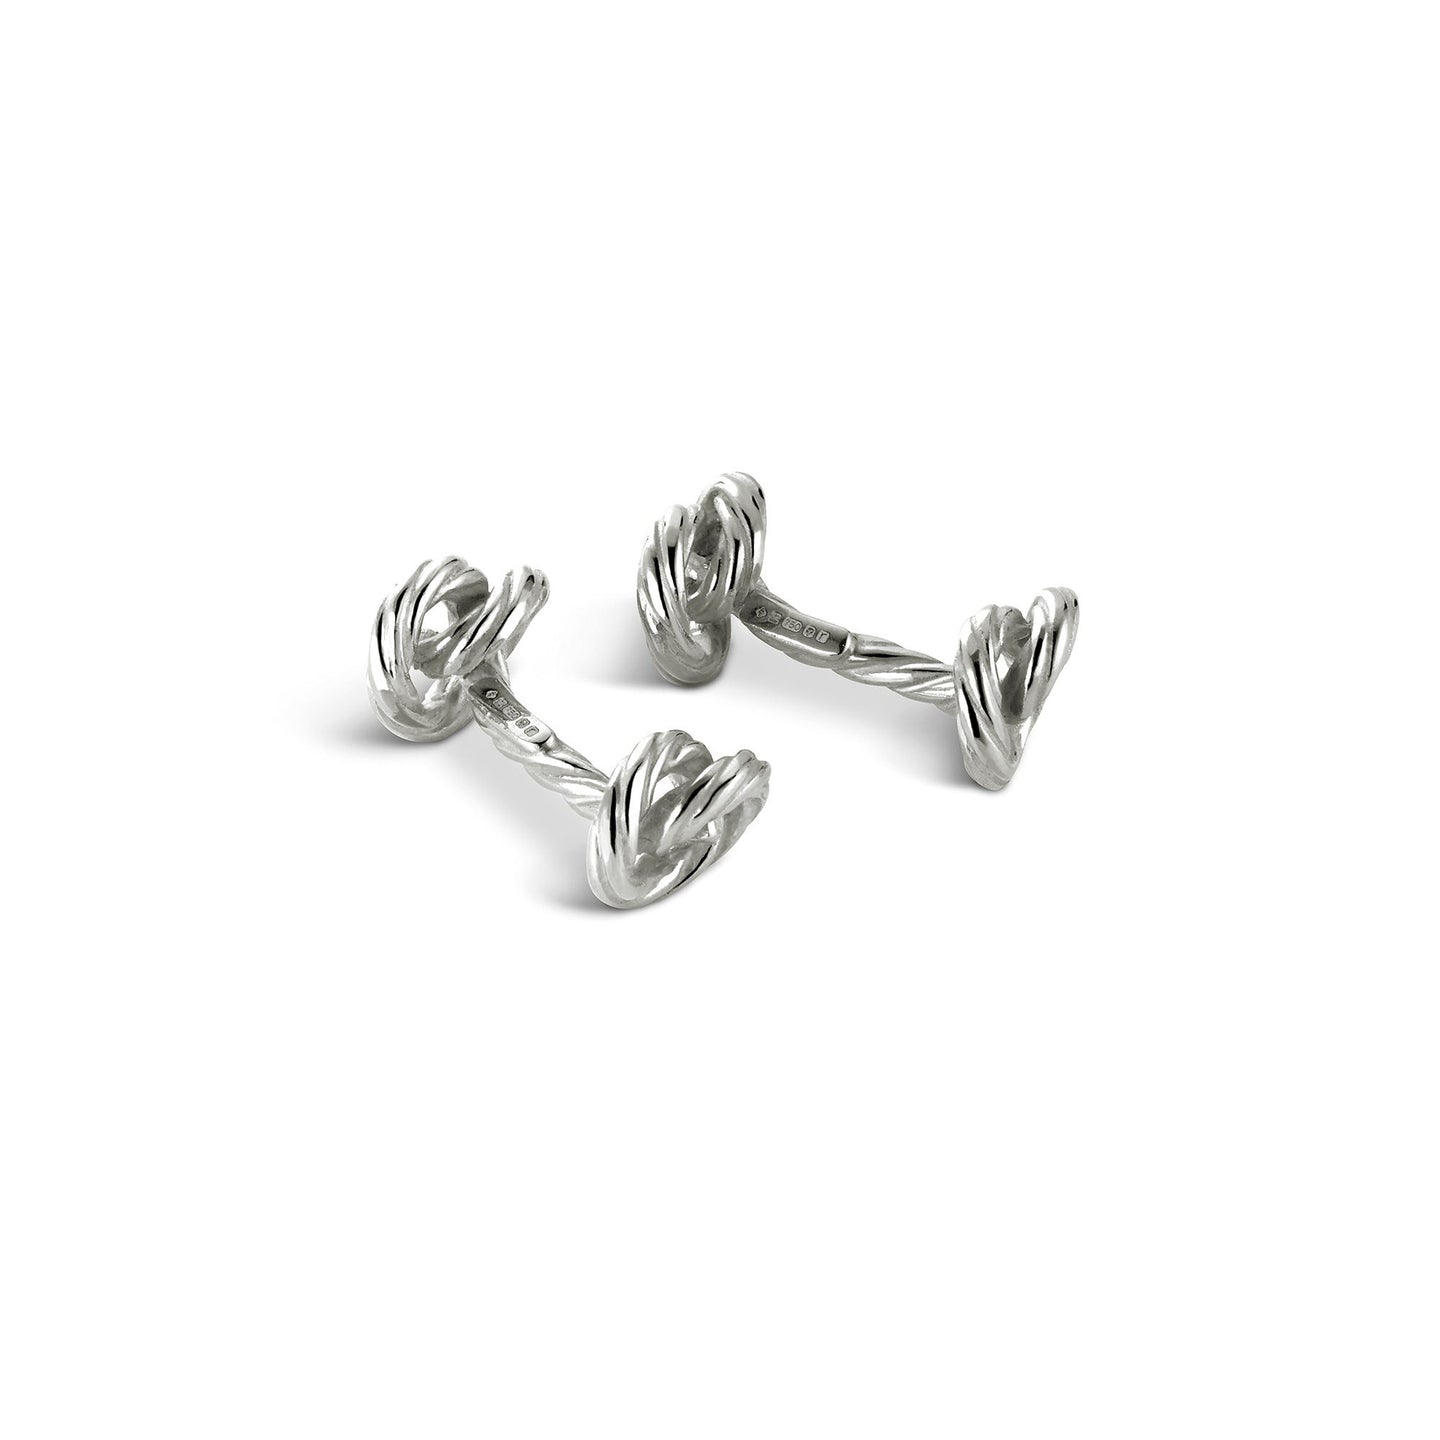 Rope Knot Cufflinks in Sterling Silver